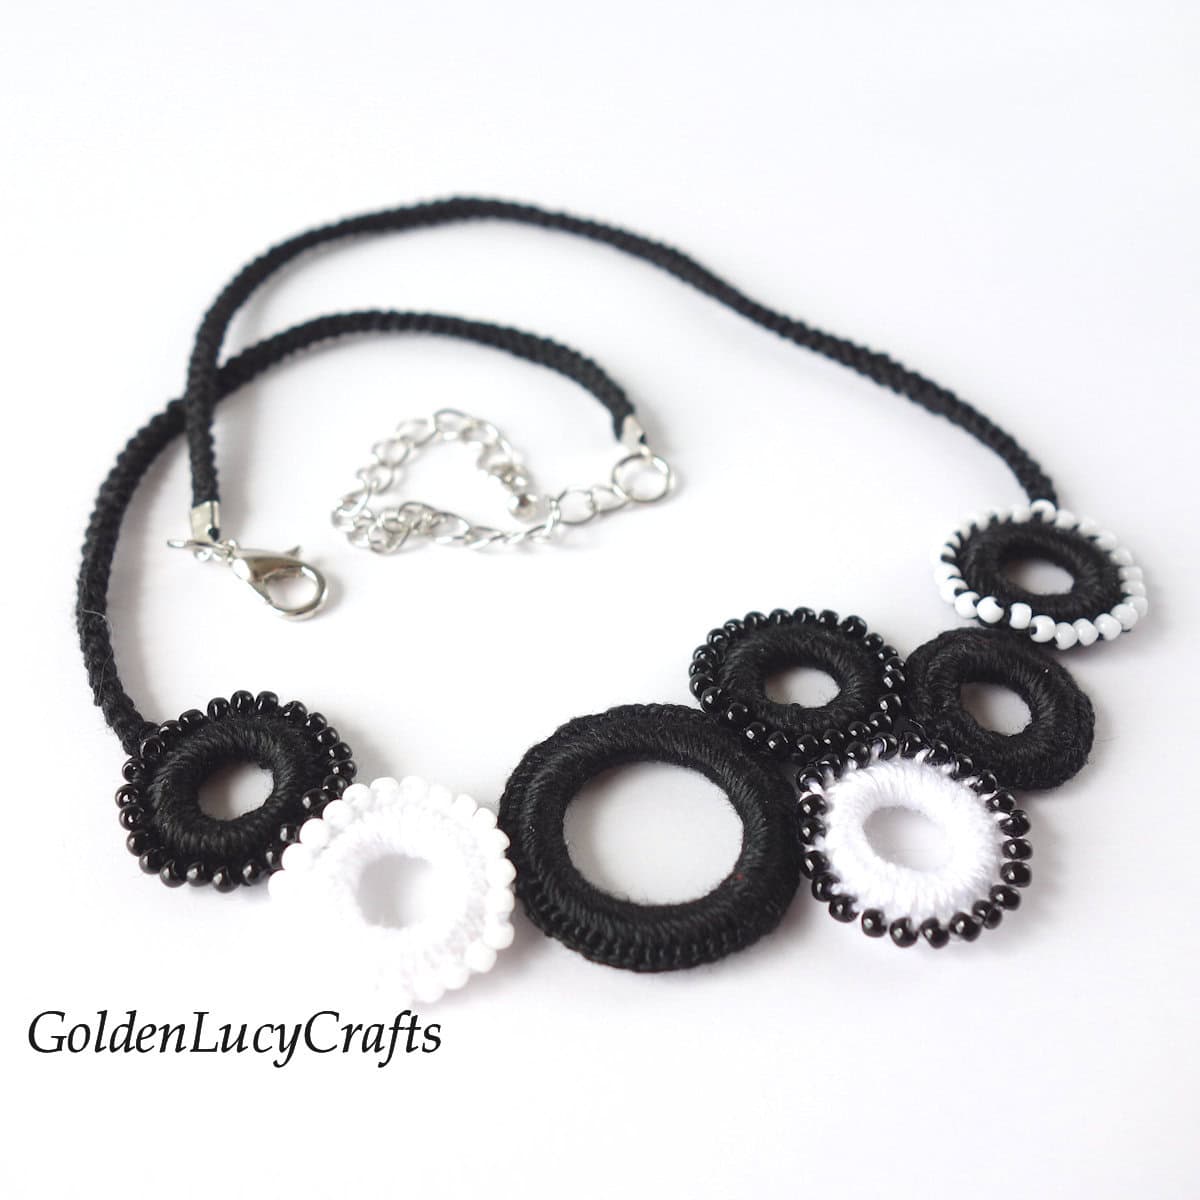 Crocheted necklace made of small black and white rings and embellished with seed beads.